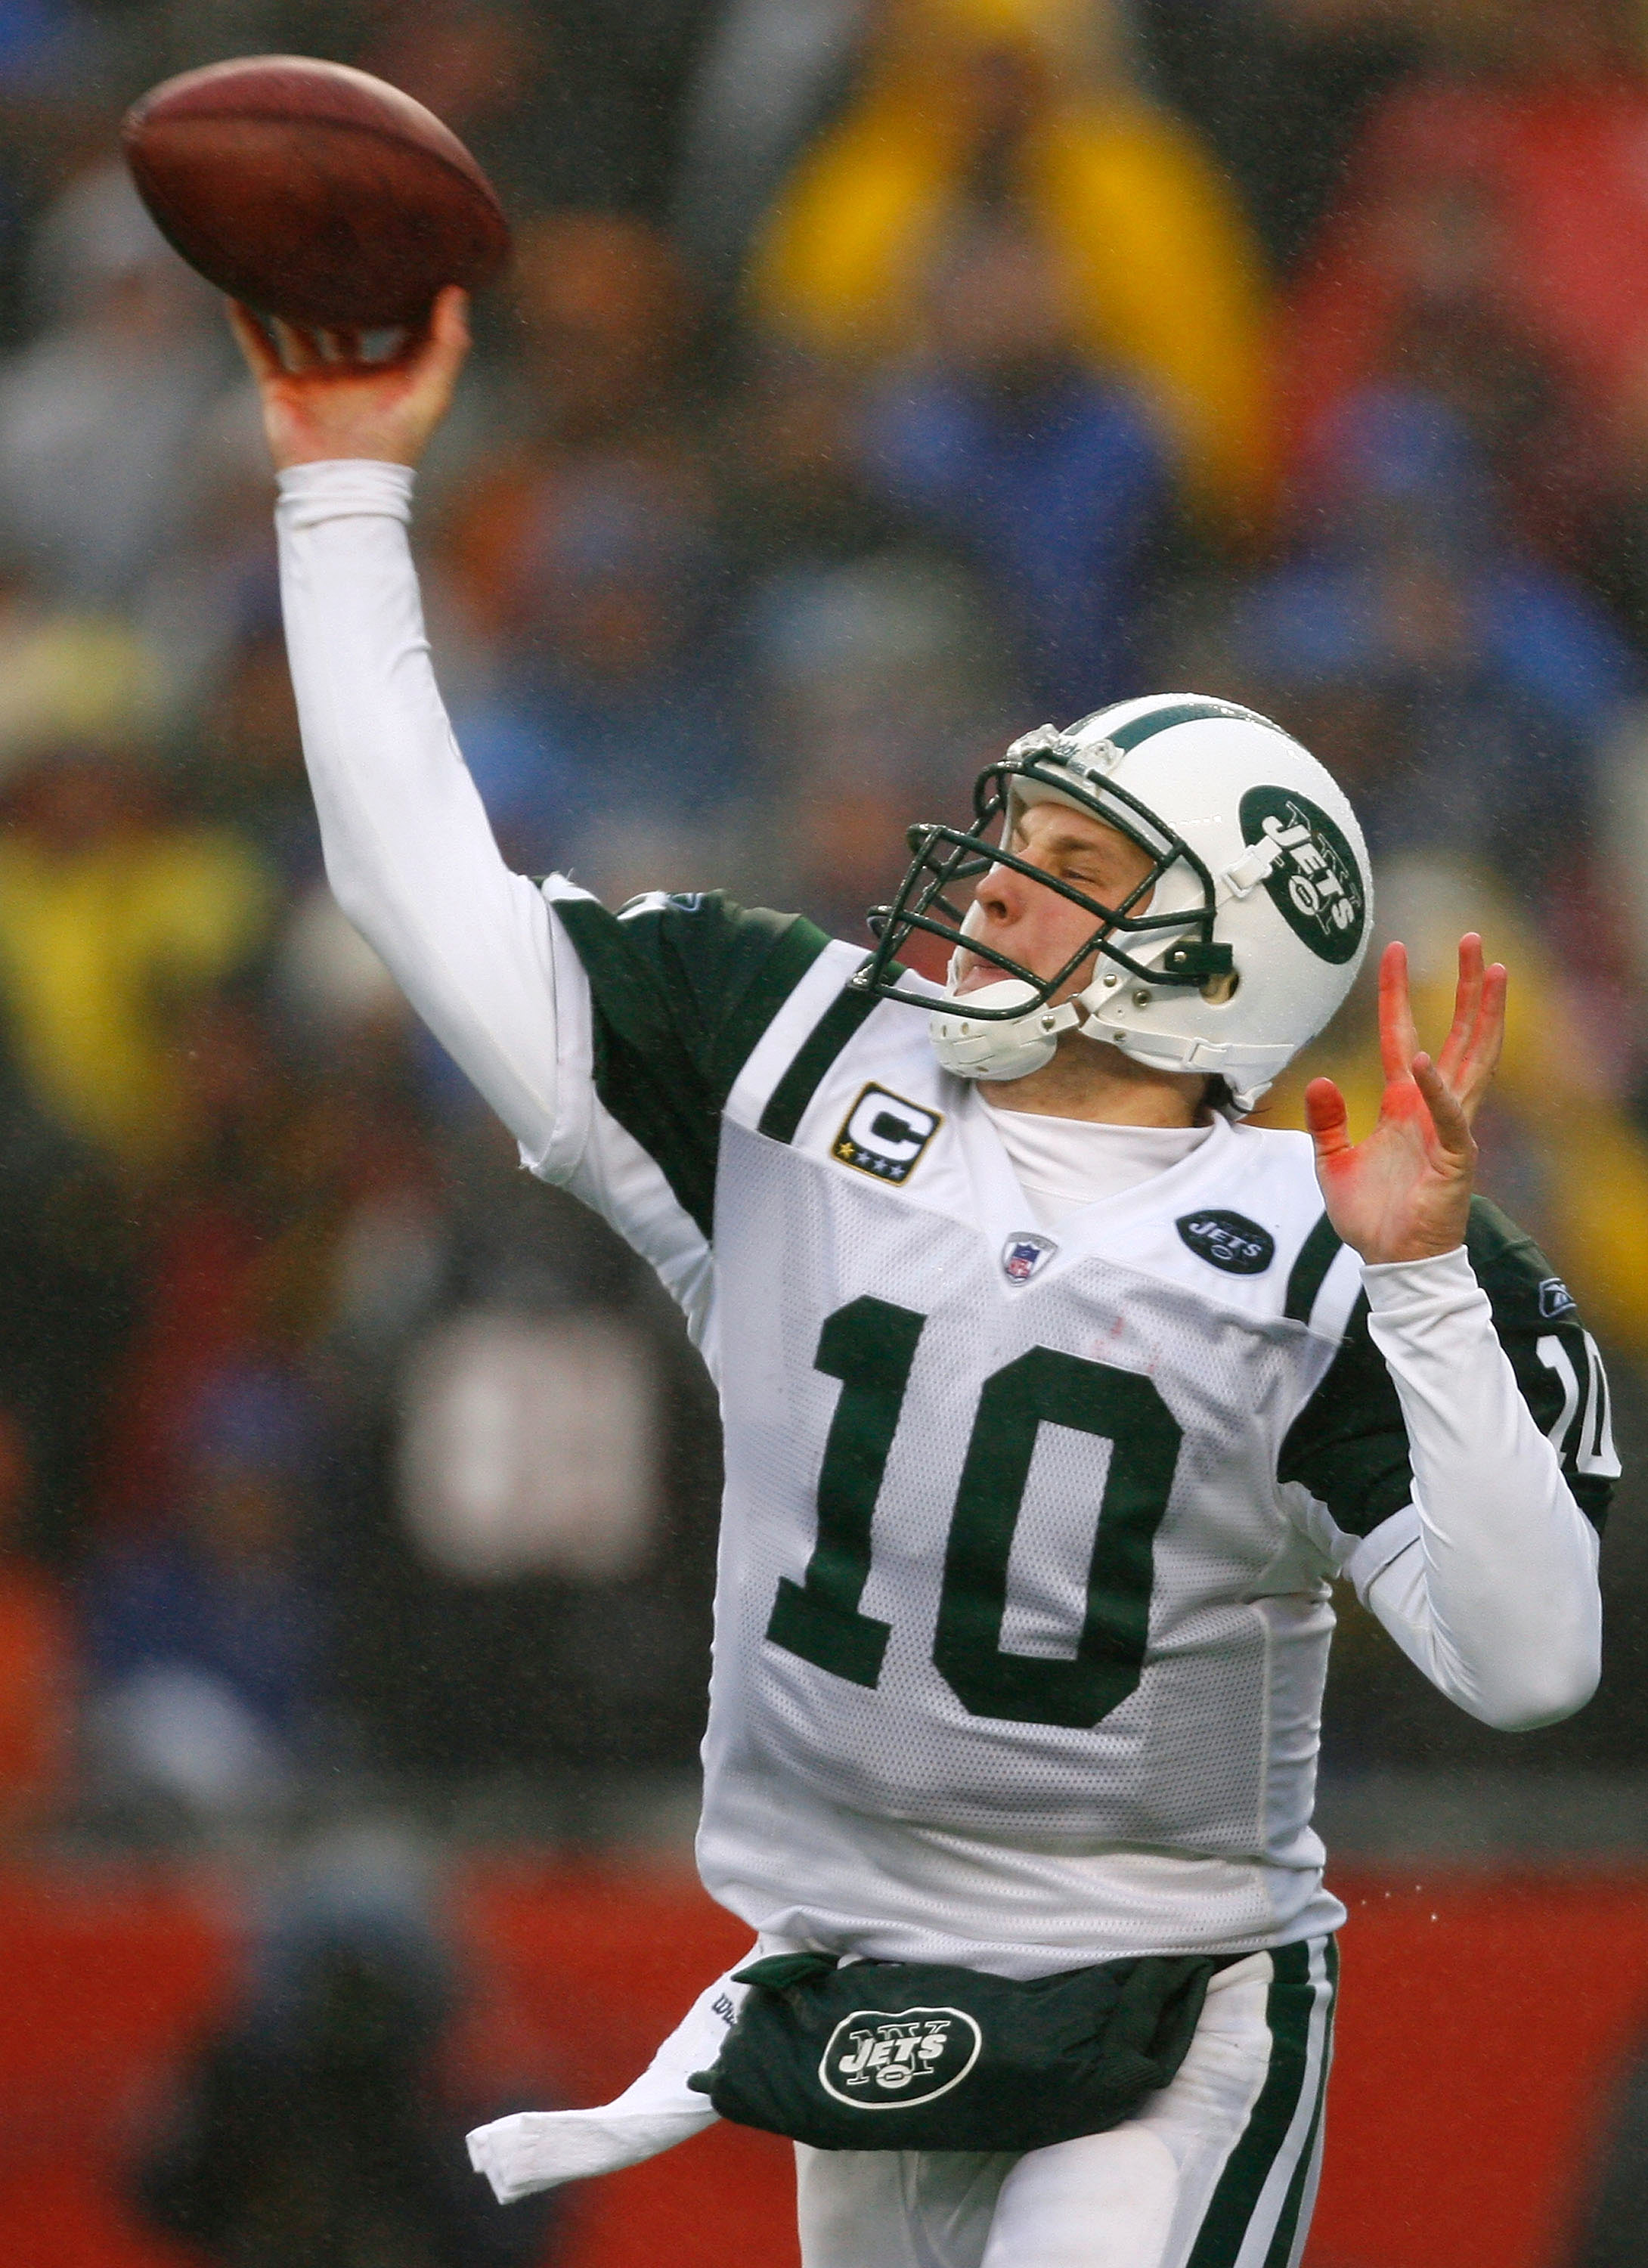 FOXBORO, MA - DECEMBER 16:  Chad Pennington #10 of the New York Jets throws a pass against the New England Patriots at Gillette Stadium on December 16, 2007 in Foxboro, Massachusetts. The Patriots won 20-10. (Photo by Jim Rogash/Getty Images)